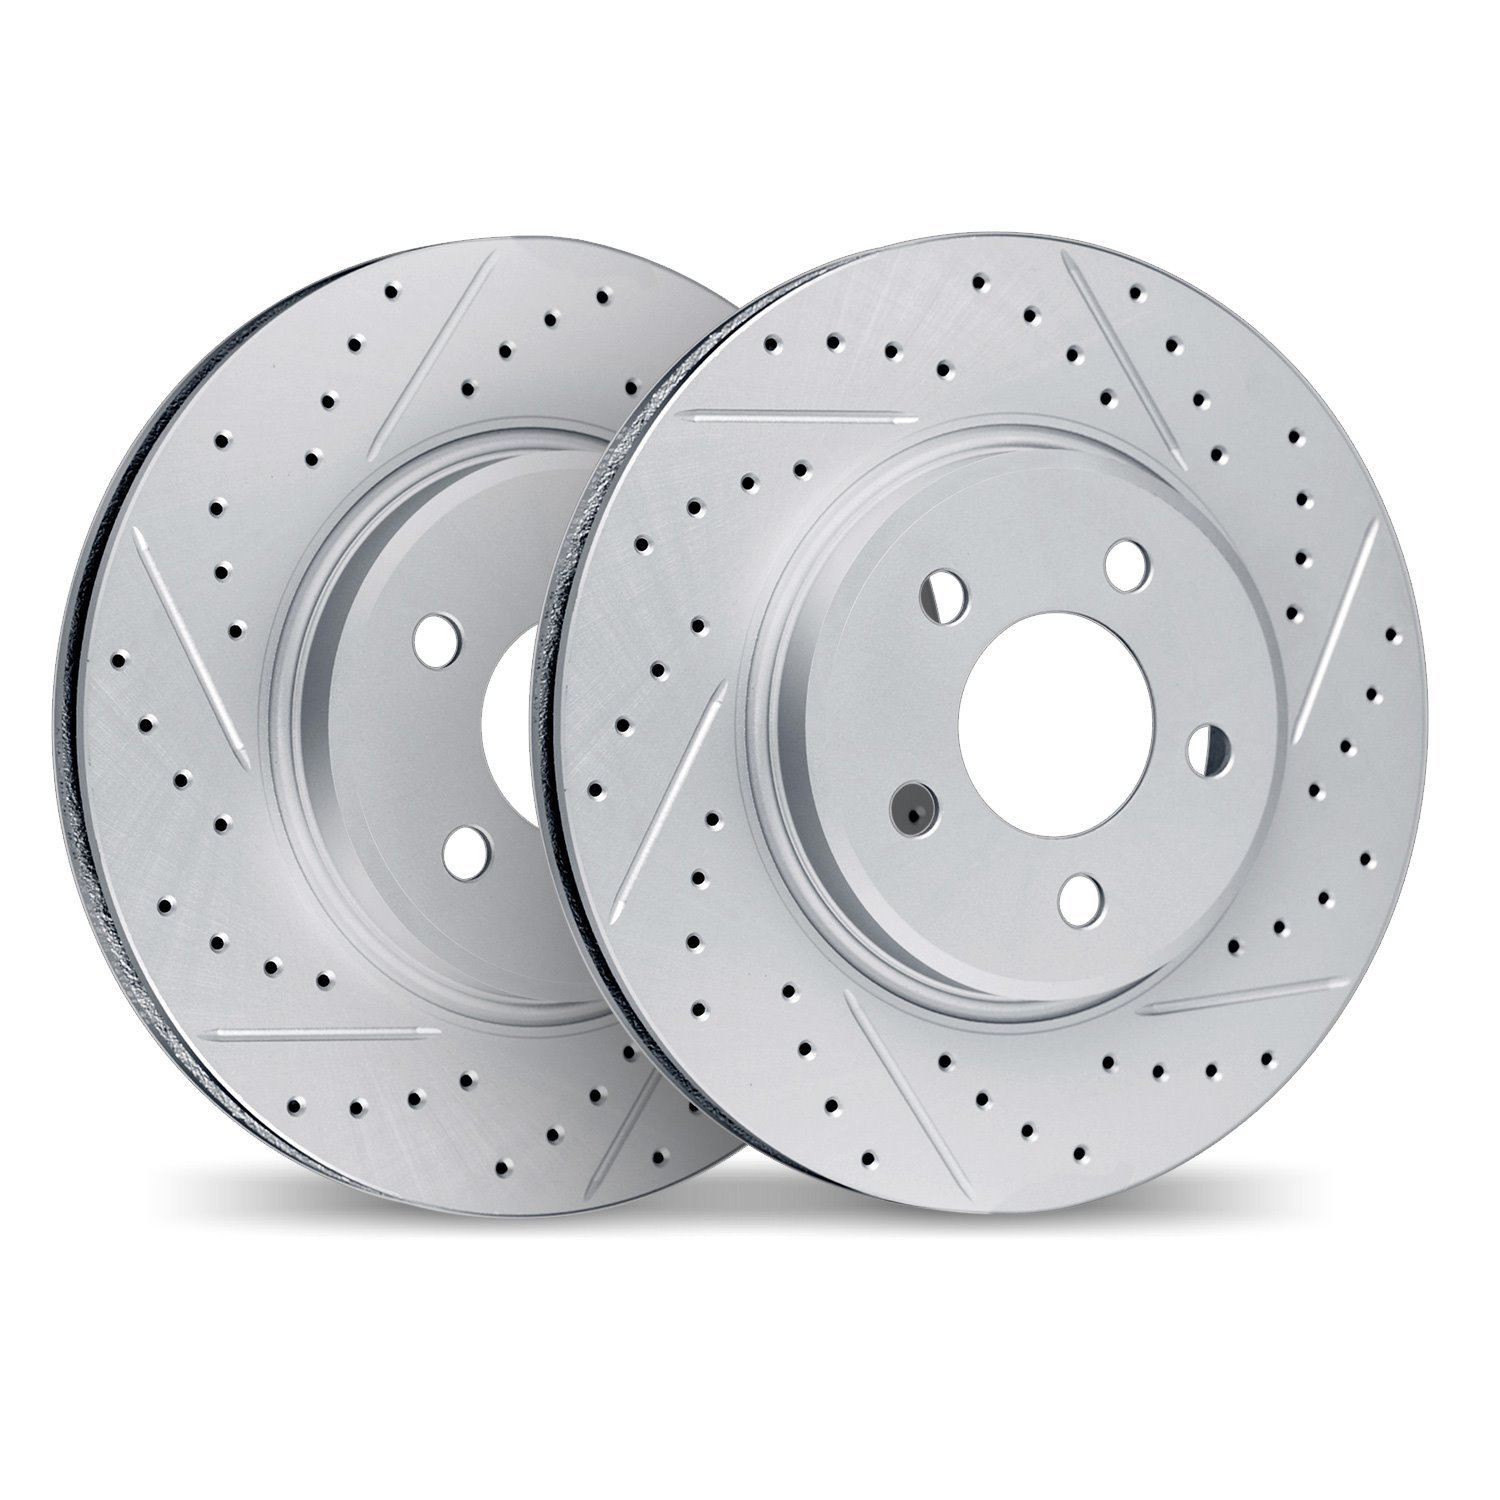 2002-46020 Geoperformance Drilled/Slotted Brake Rotors, 2009-2011 GM, Position: Front